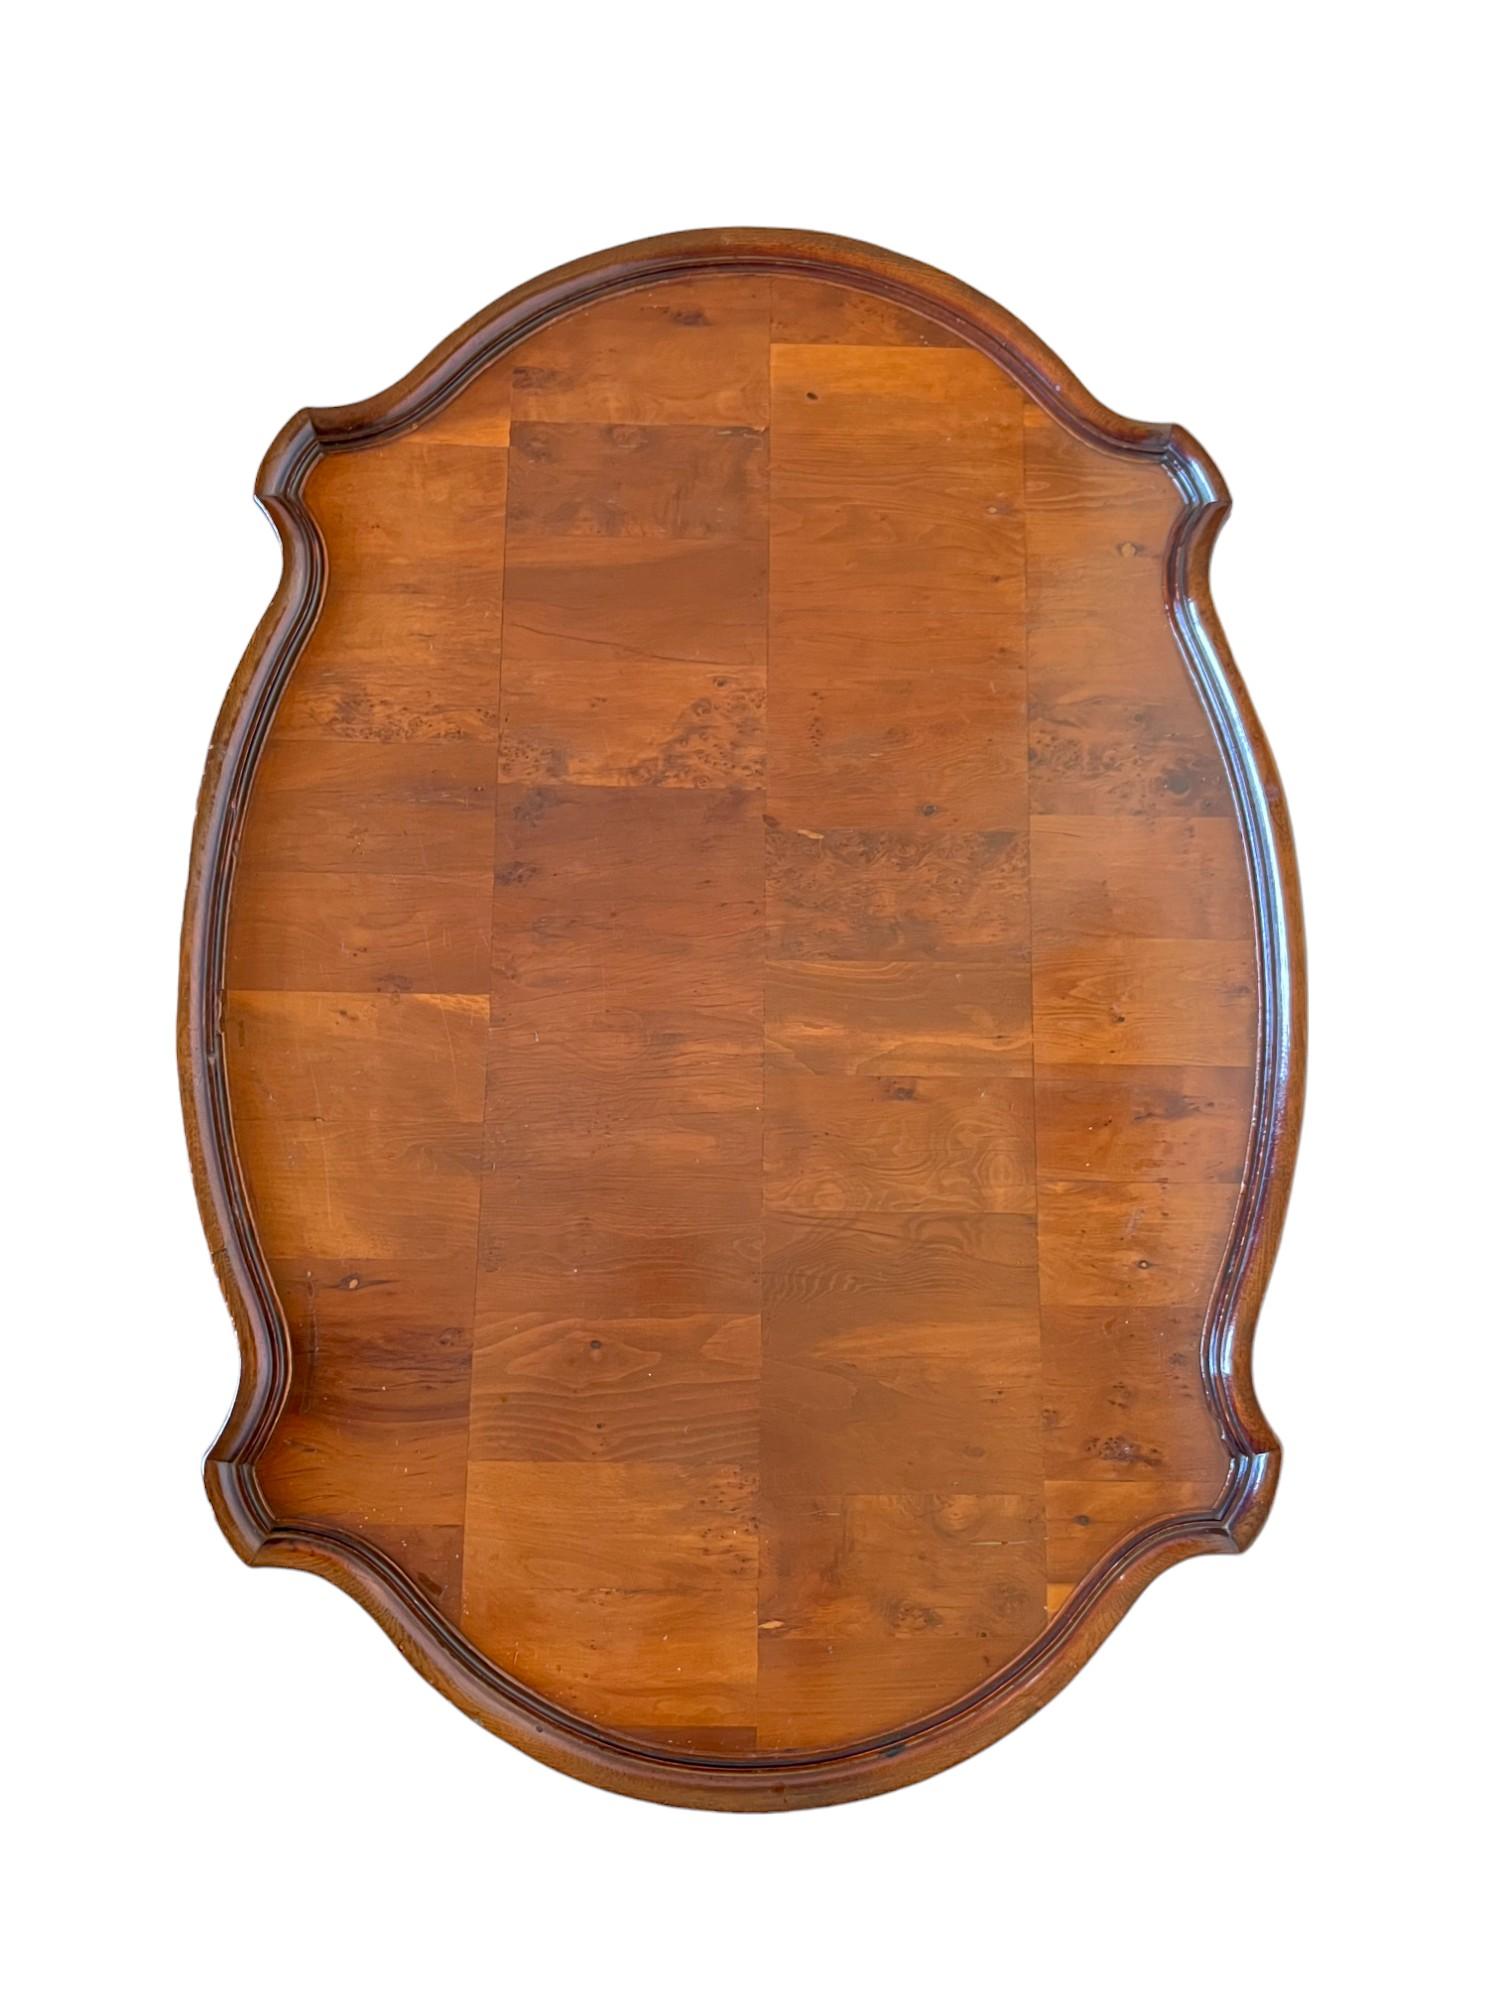 A vintage Hollywood Regency faux bamboo coffee or cocktail table by Hekman Furniture of the 1970's Bambu Regency collection. It features an oval patchwork burl wood top surface with a scalloped and beveled lipped edge, turned wood saber style